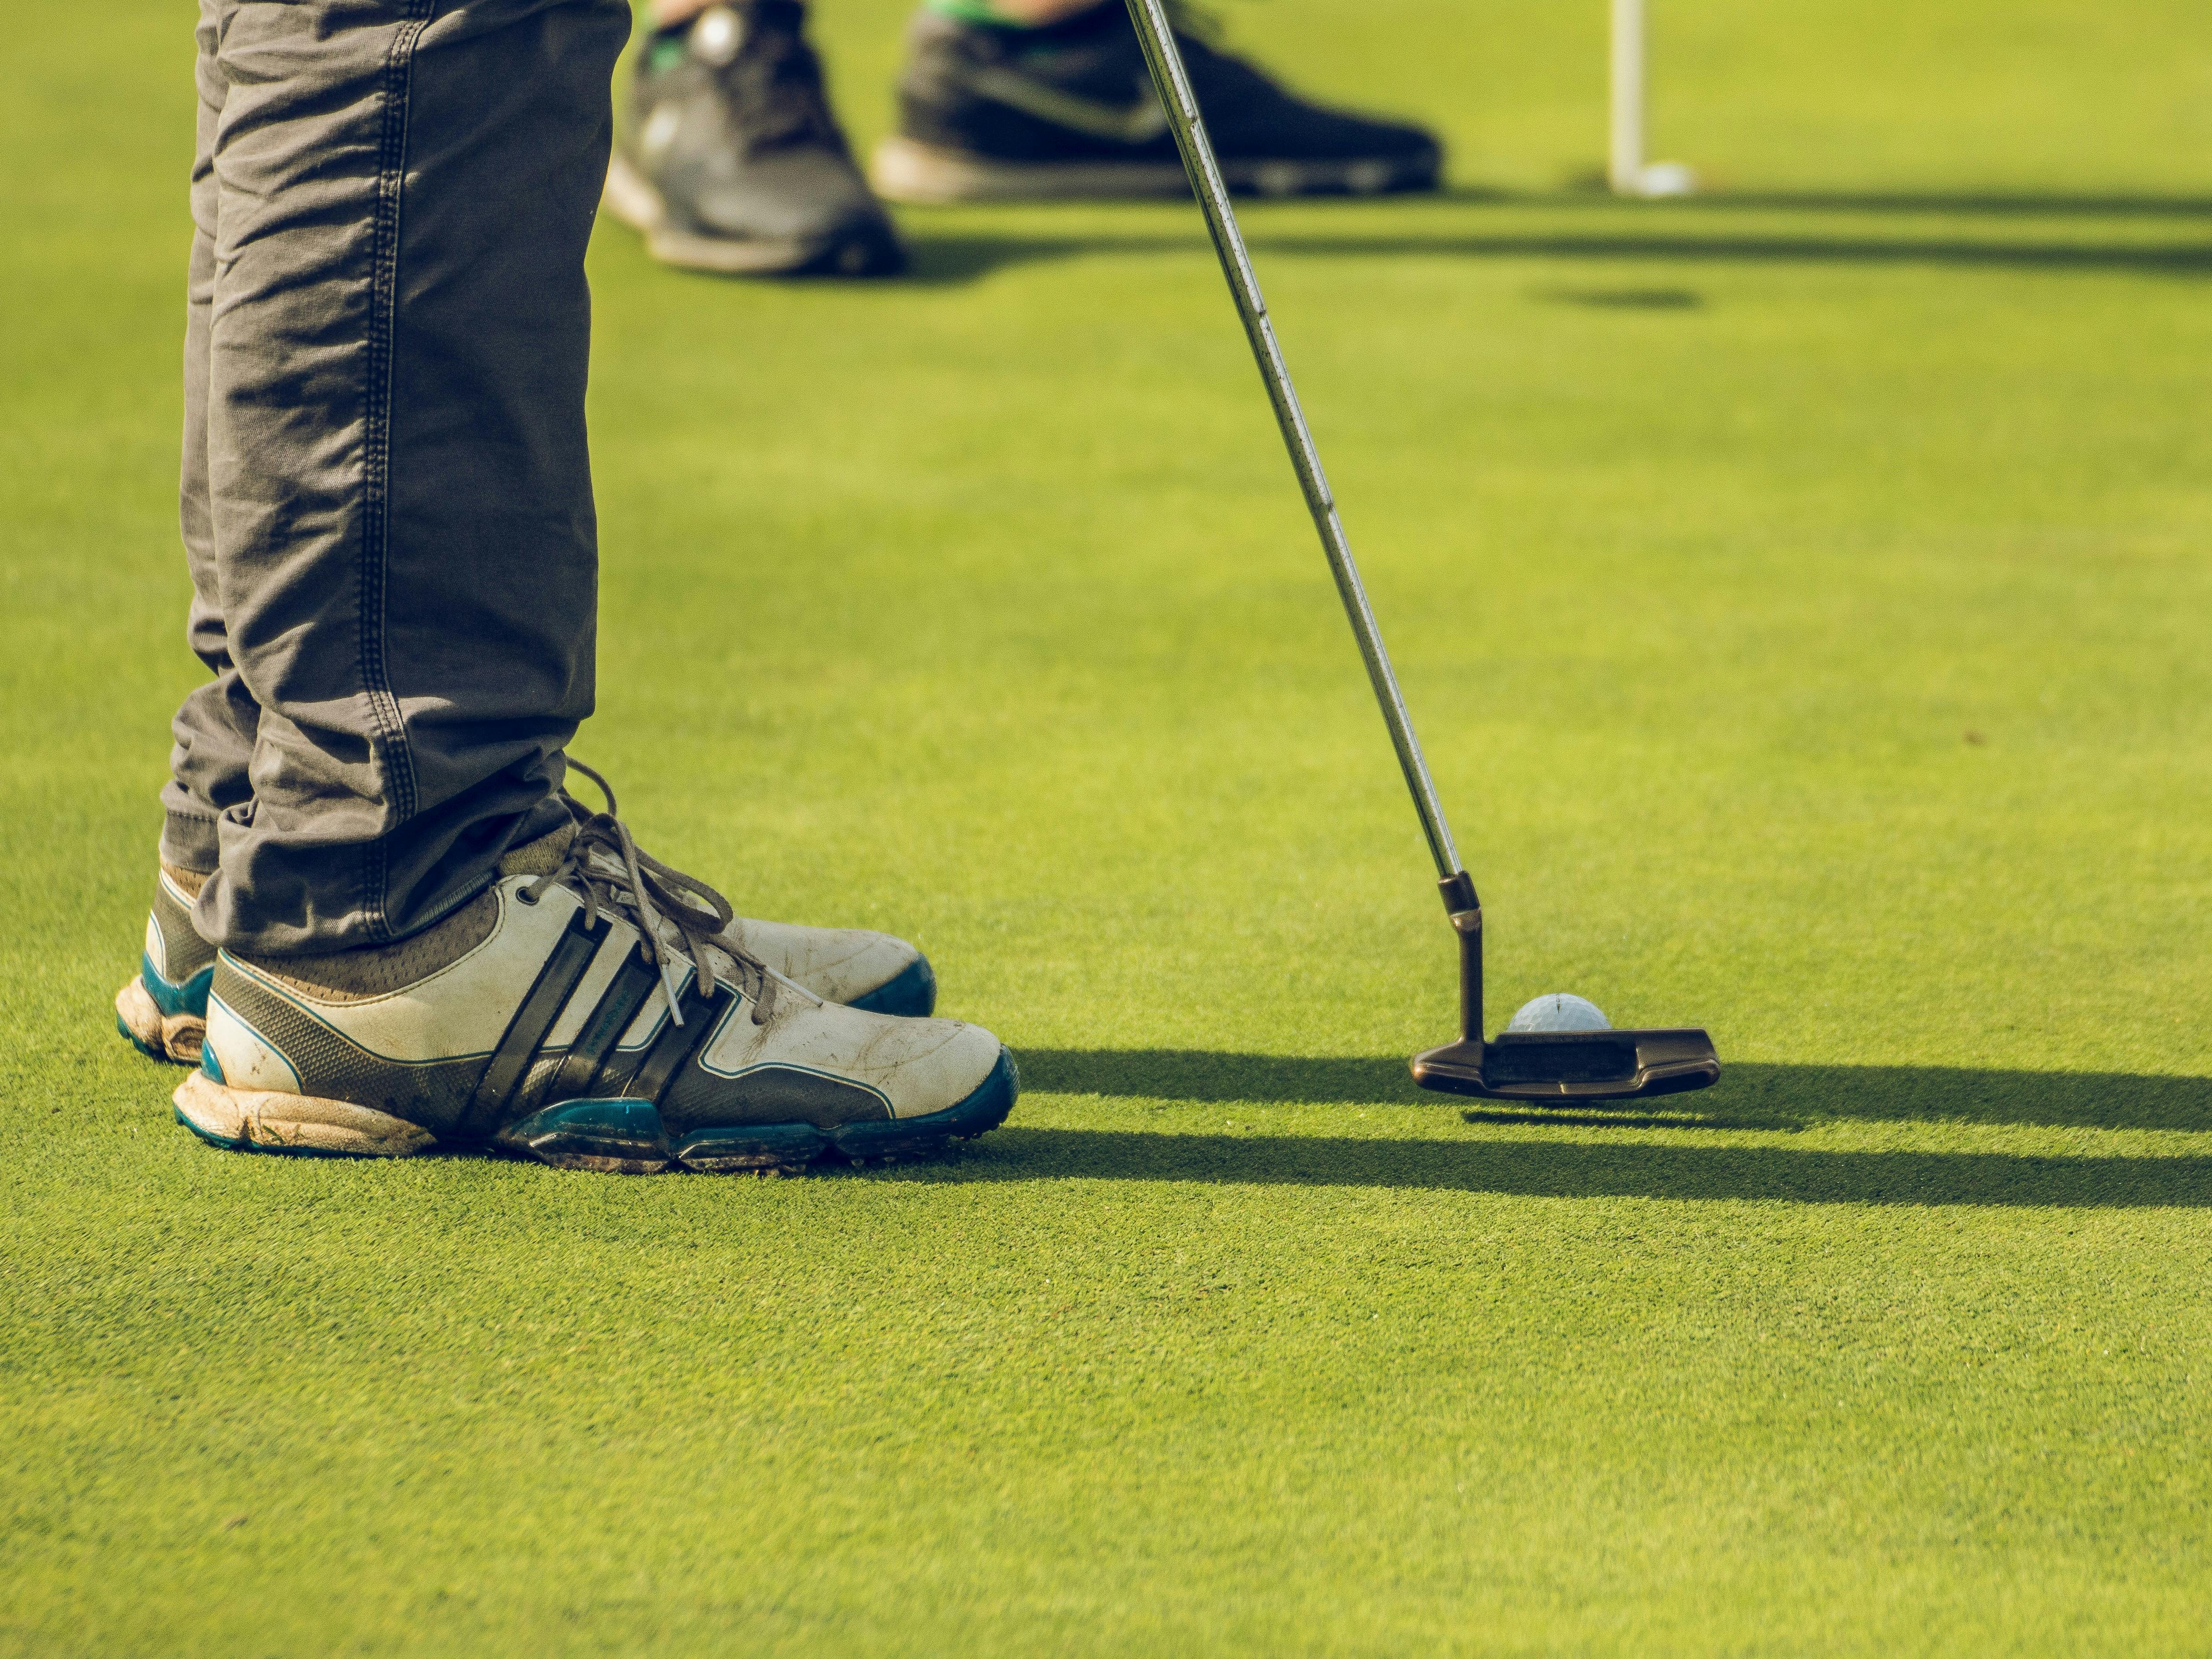 The lower legs and trainers of an individual lining up their putter with the ball